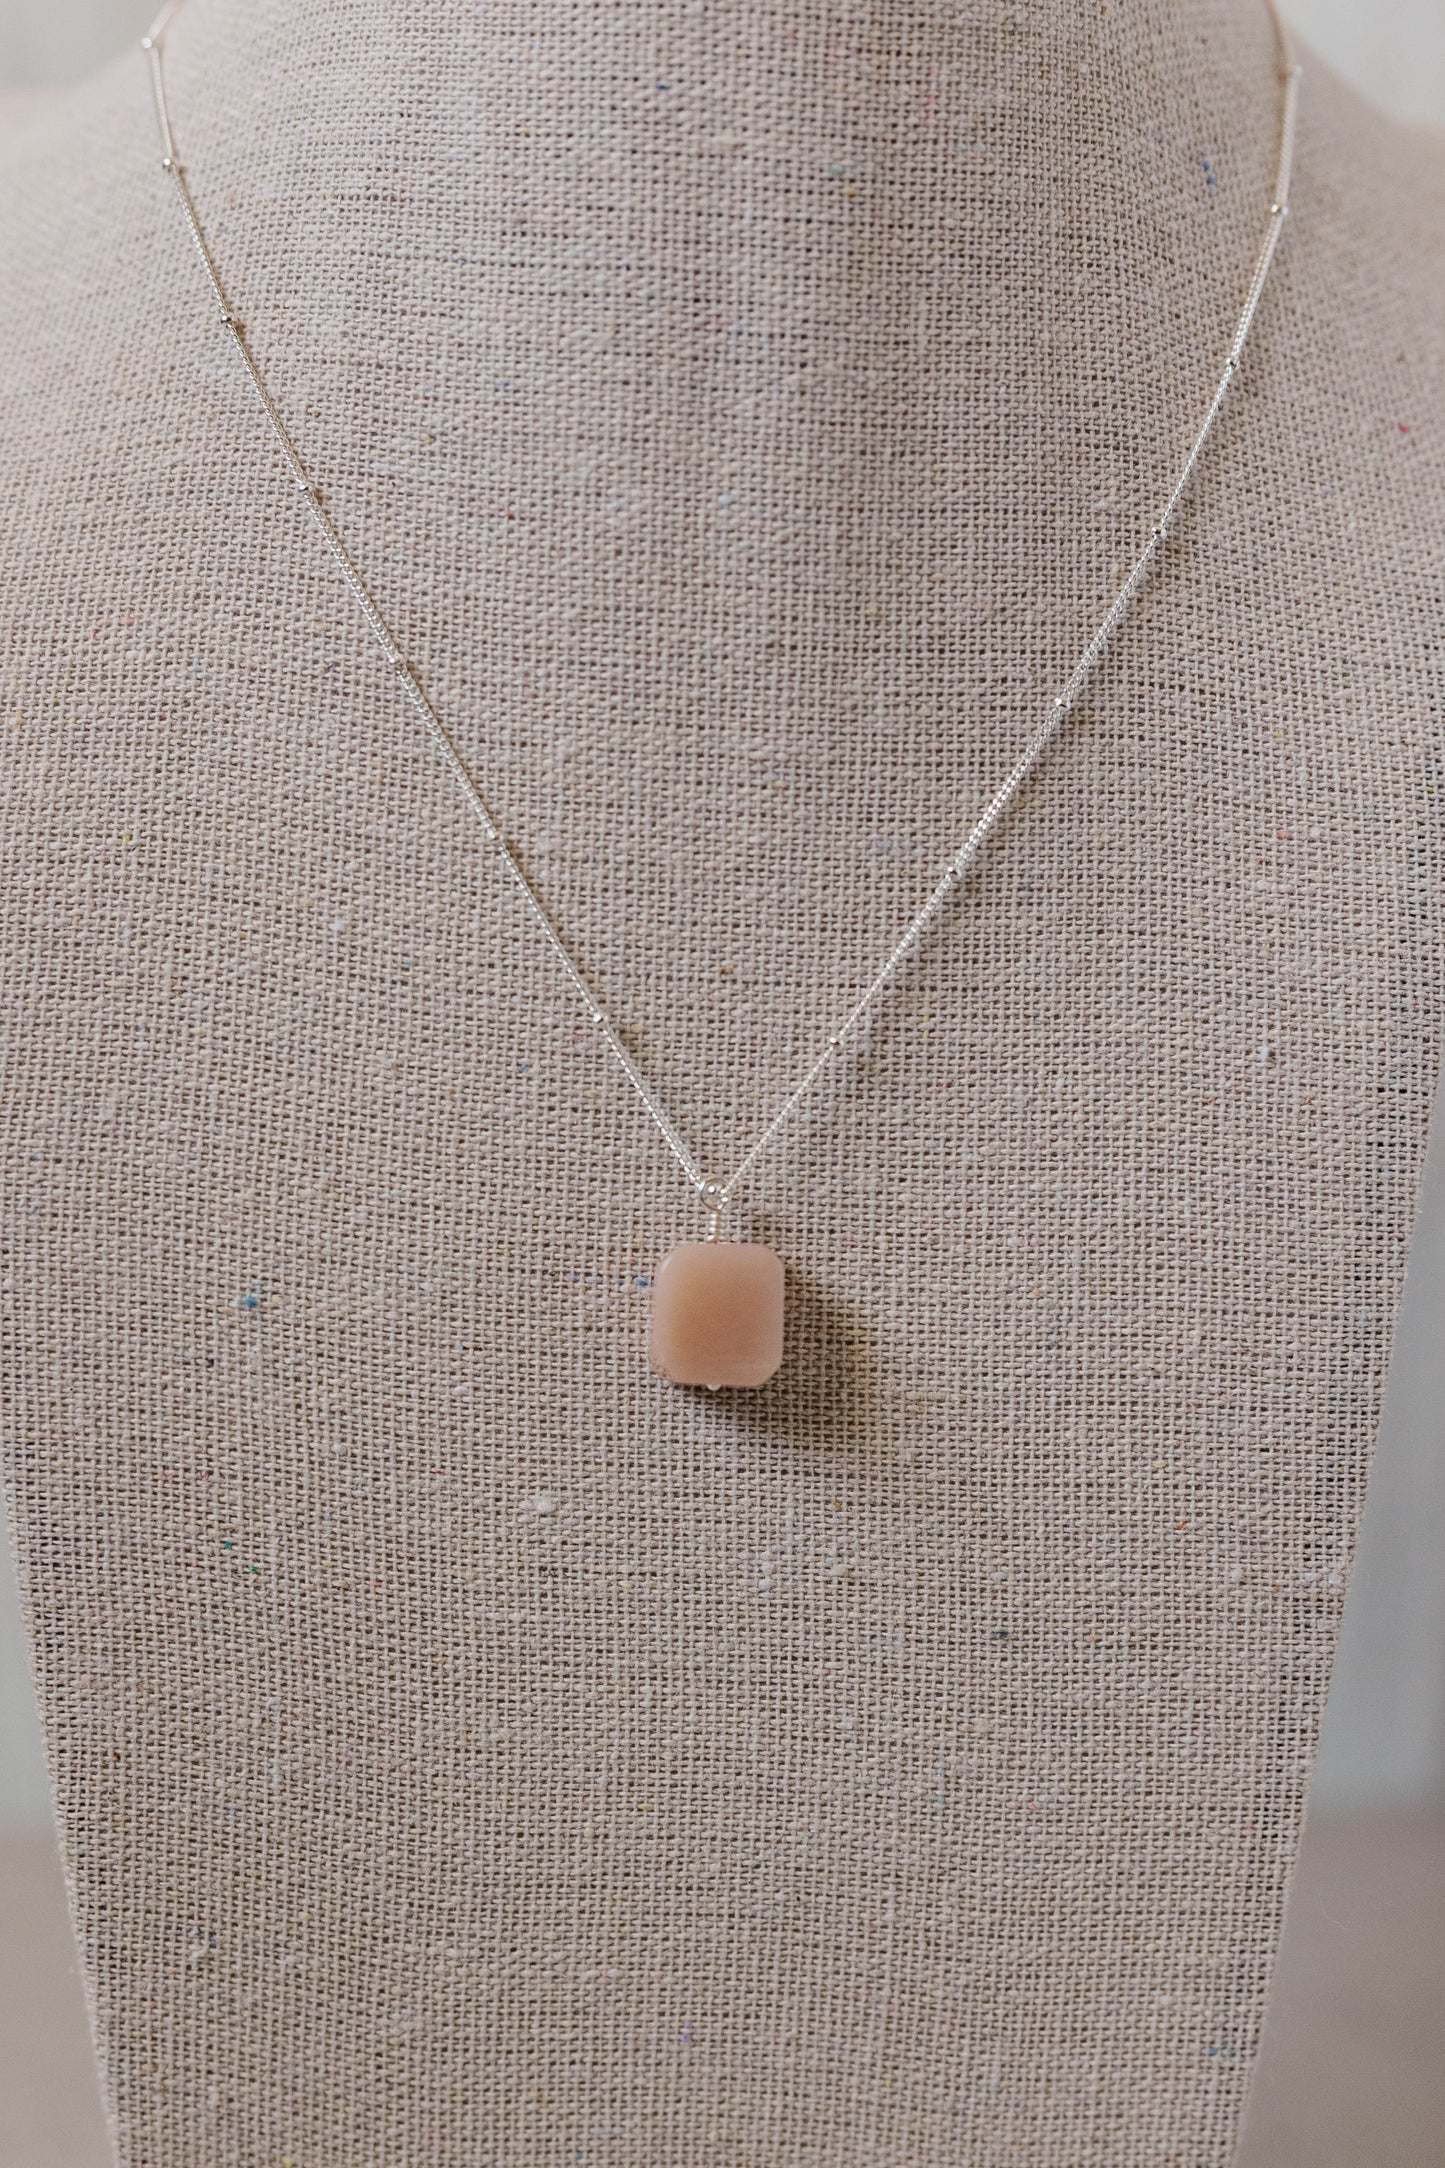 Just Peachy Necklace